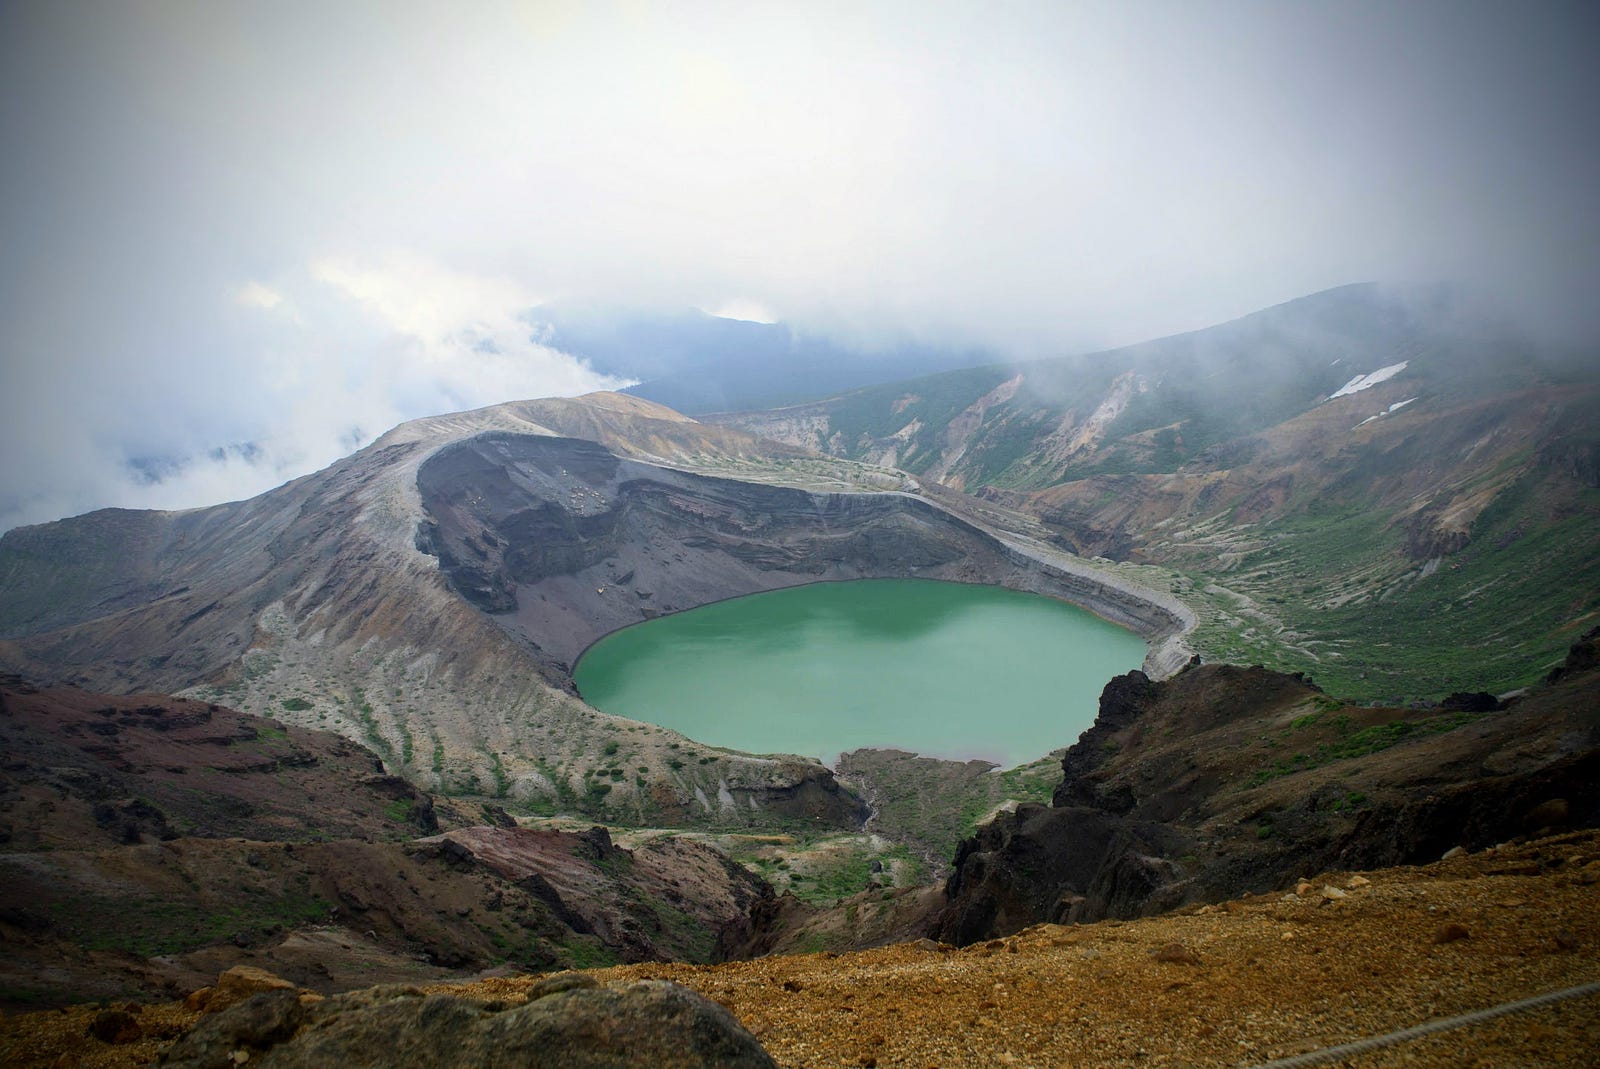 The emerald green crater lake ‘Okama’ of Zao-san surrounded by cloudy mountain peaks